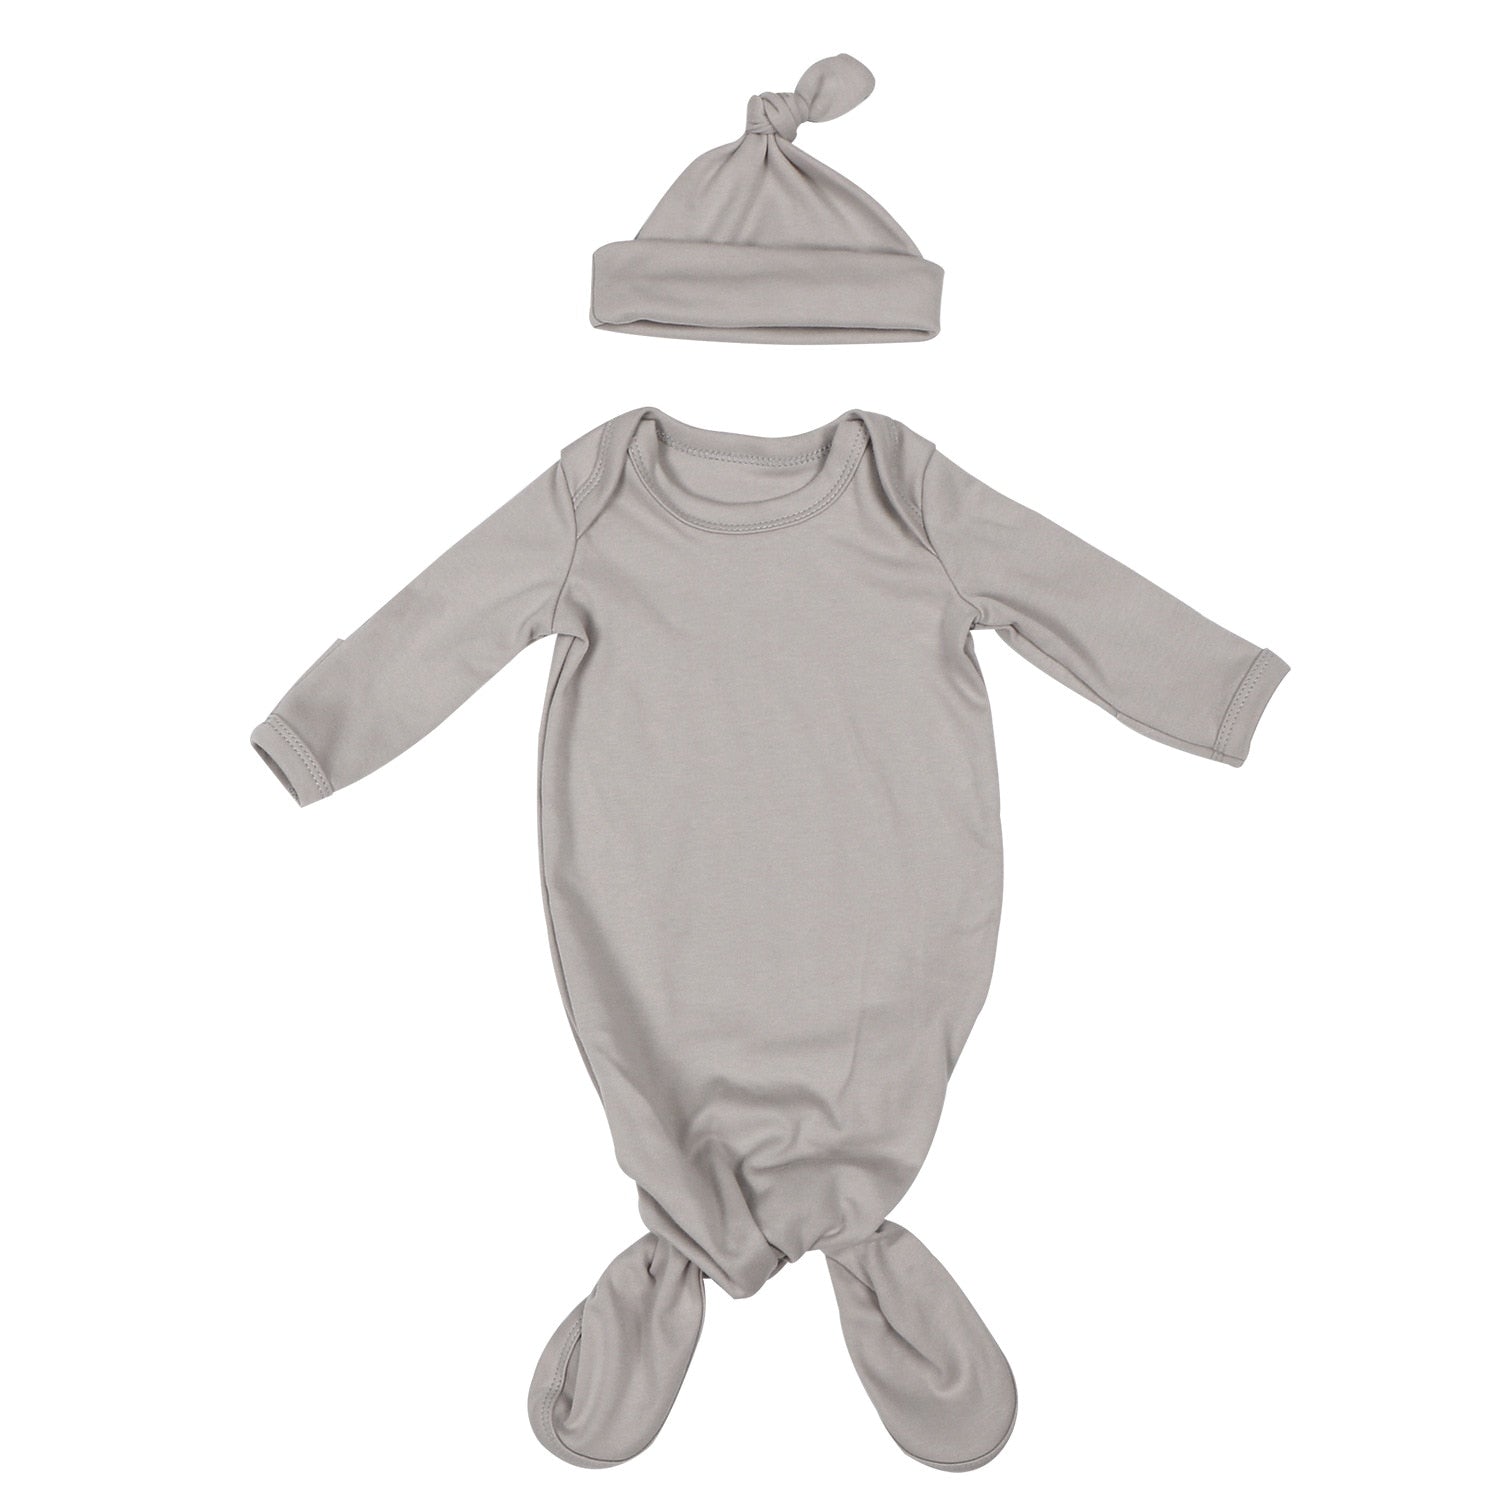 The Jade Knotted Baby swaddle